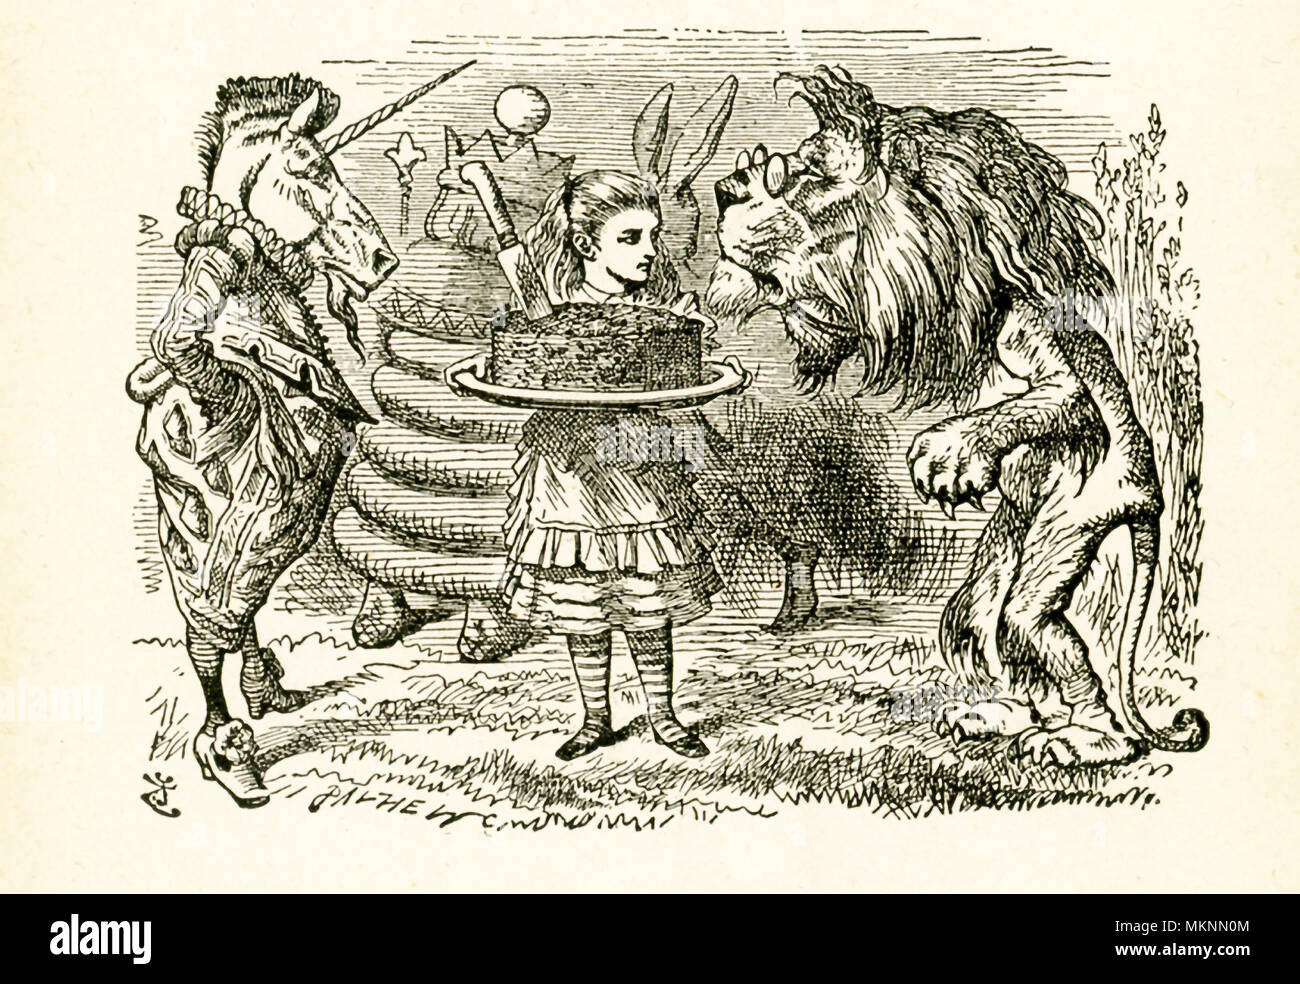 This illustration of Alice and the Unicorn and Lion is from 'Through the Looking-Glass and What Alice Found There' by Lewis Carroll (Charles Lutwidge Dodgson), who wrote this novel in 1871 as a sequel to 'Alice's Adventures in Wonderland.' It shows Alice holding a plum cake with a knife in it for the Unicorn and Lion. Stock Photo